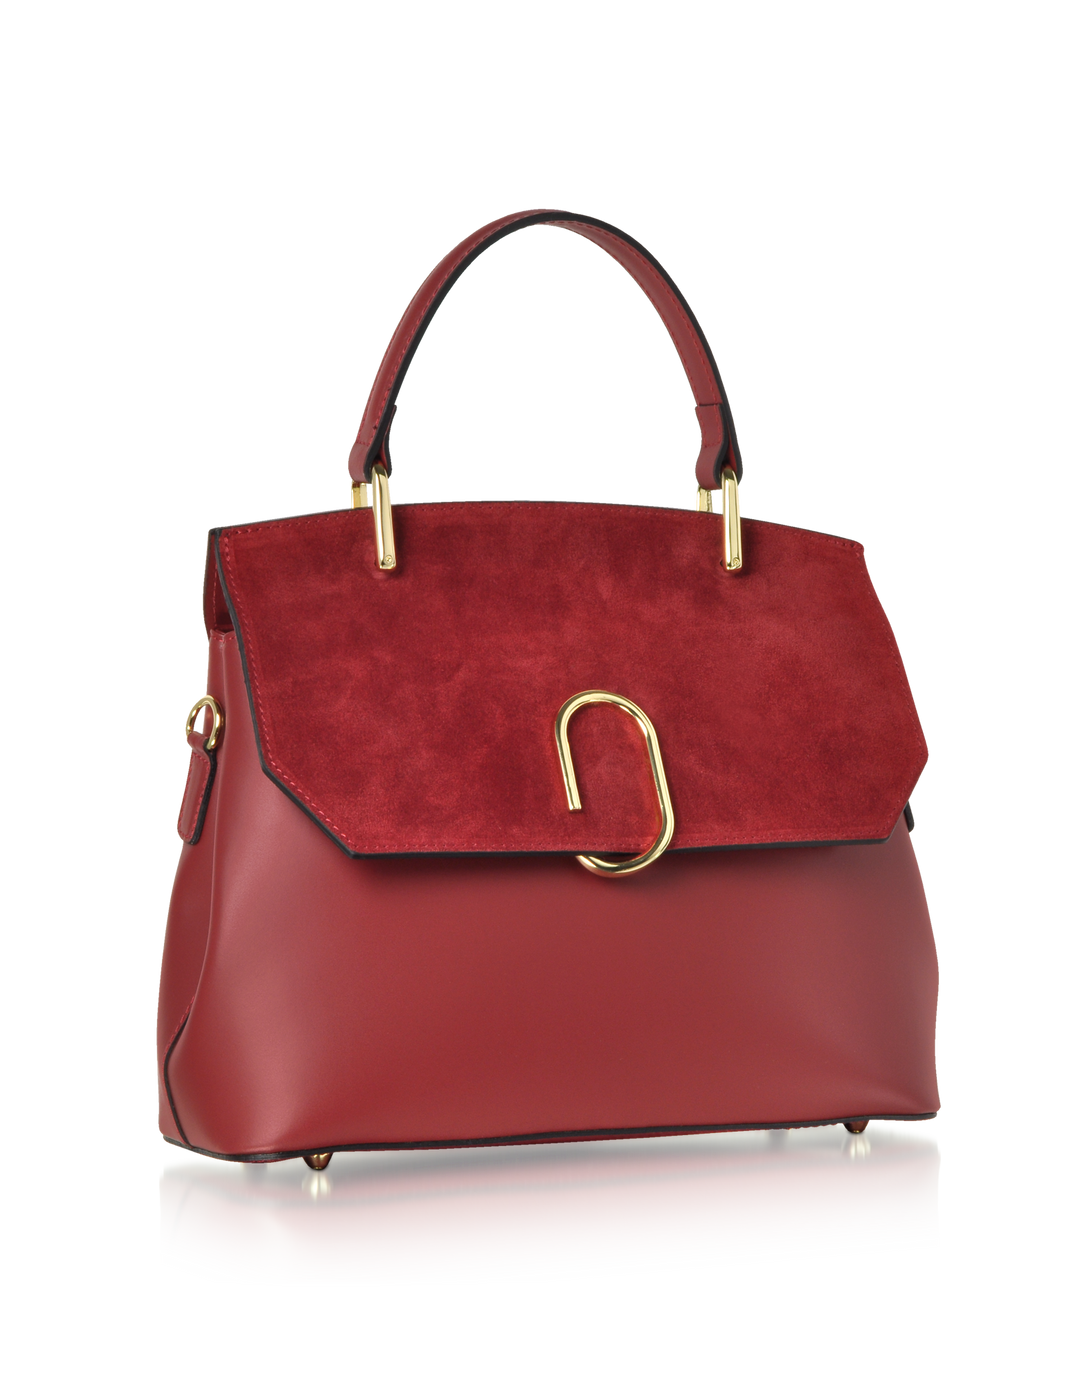 Elegant red leather handbag with gold accents and suede flap